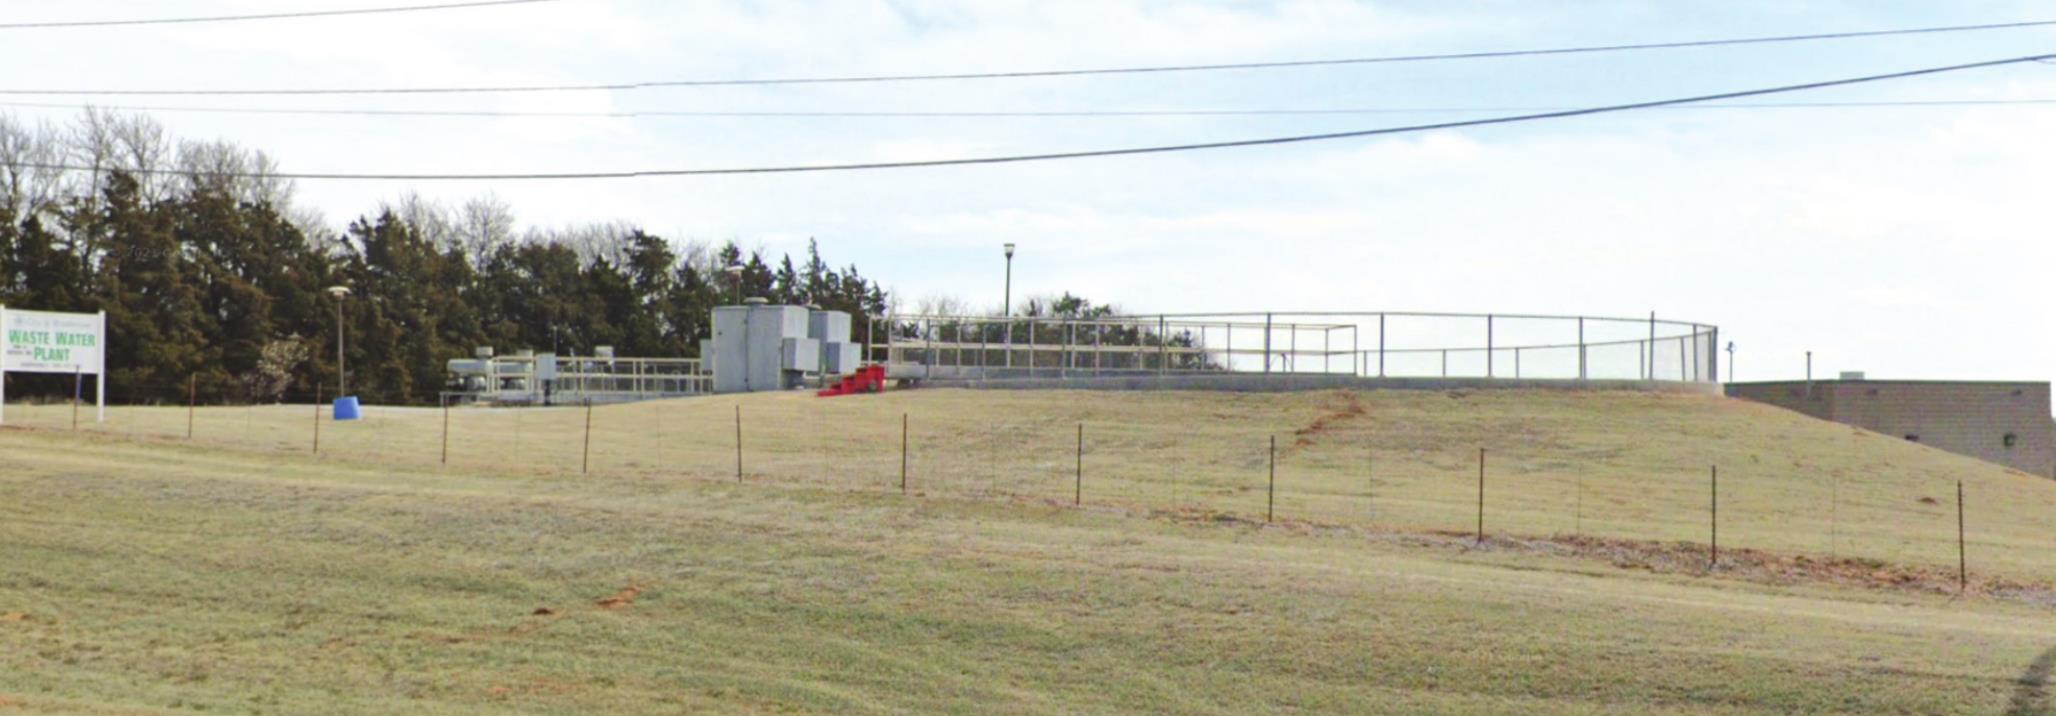 During a Weatherford City Commission meeting Thursday, the commission approved a $450,000 grant to help pay for improvements at the Waste Water Plant in Weatherford. Provided